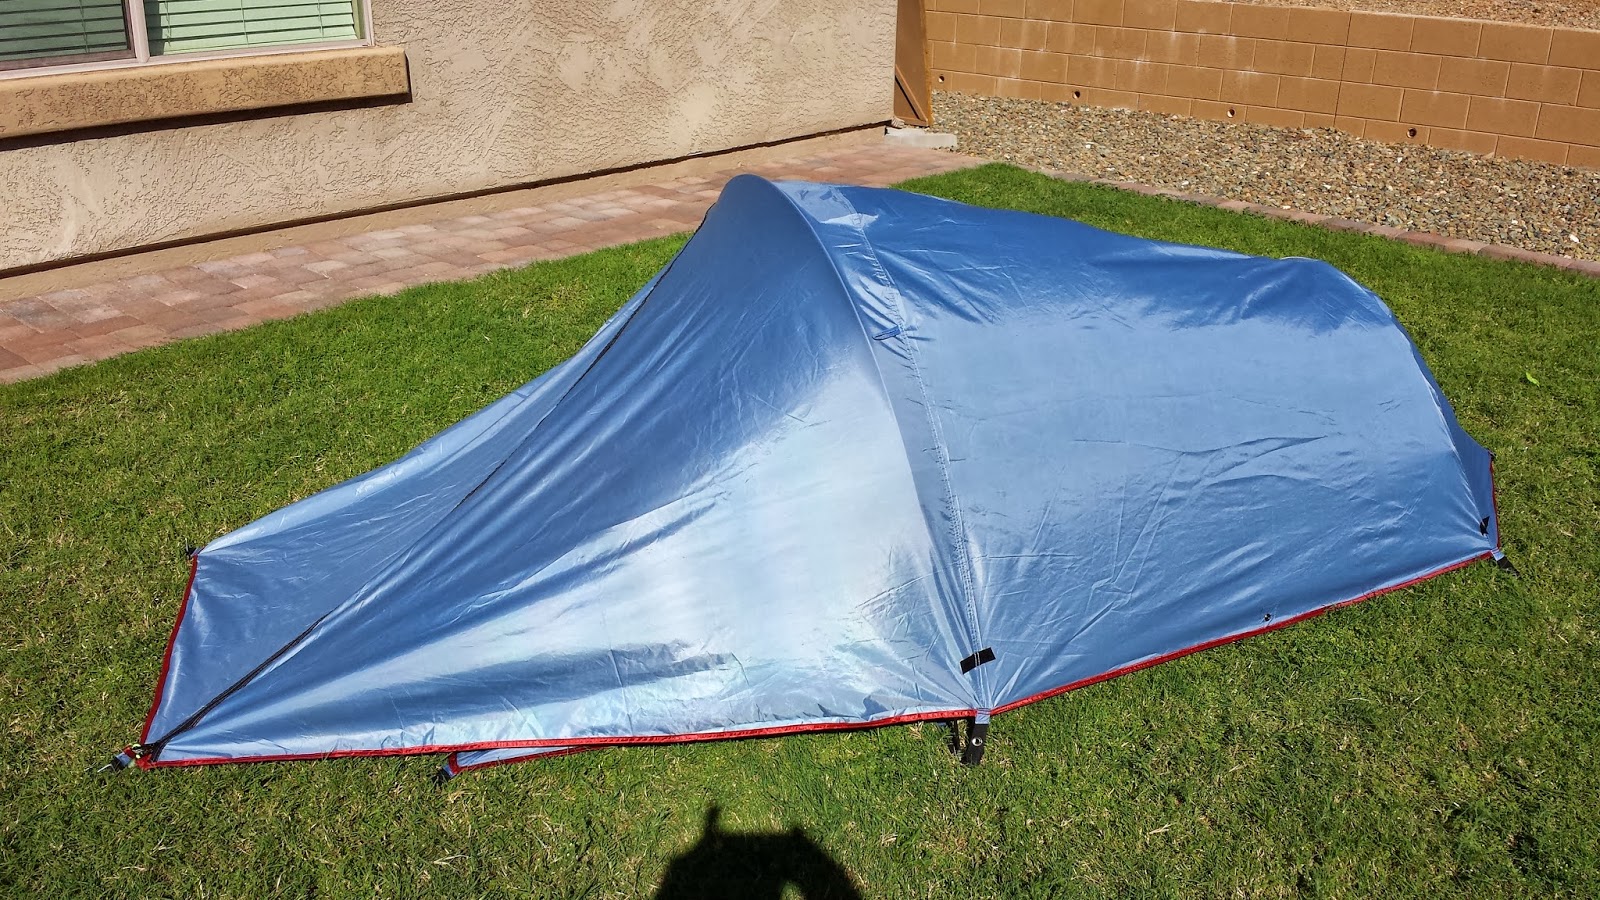 Texsport Saguaro Bivy Shelter Tent has a add-on vestibule? that extends storage, adds an awning and provides weatherproof access